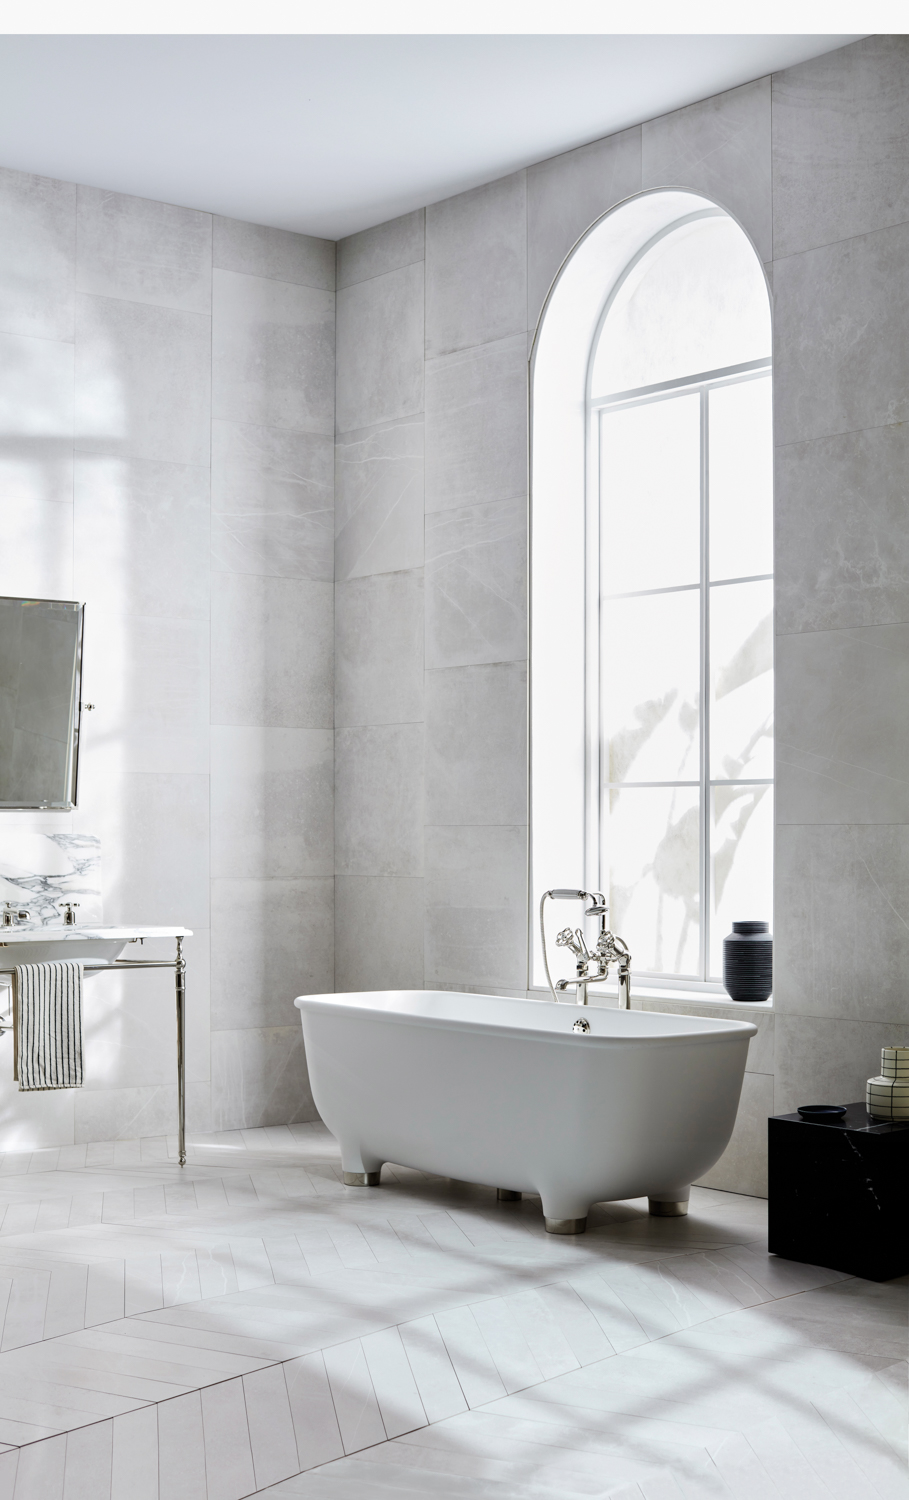 3 New Bath Products Sure To Provide A Polished Upgrade